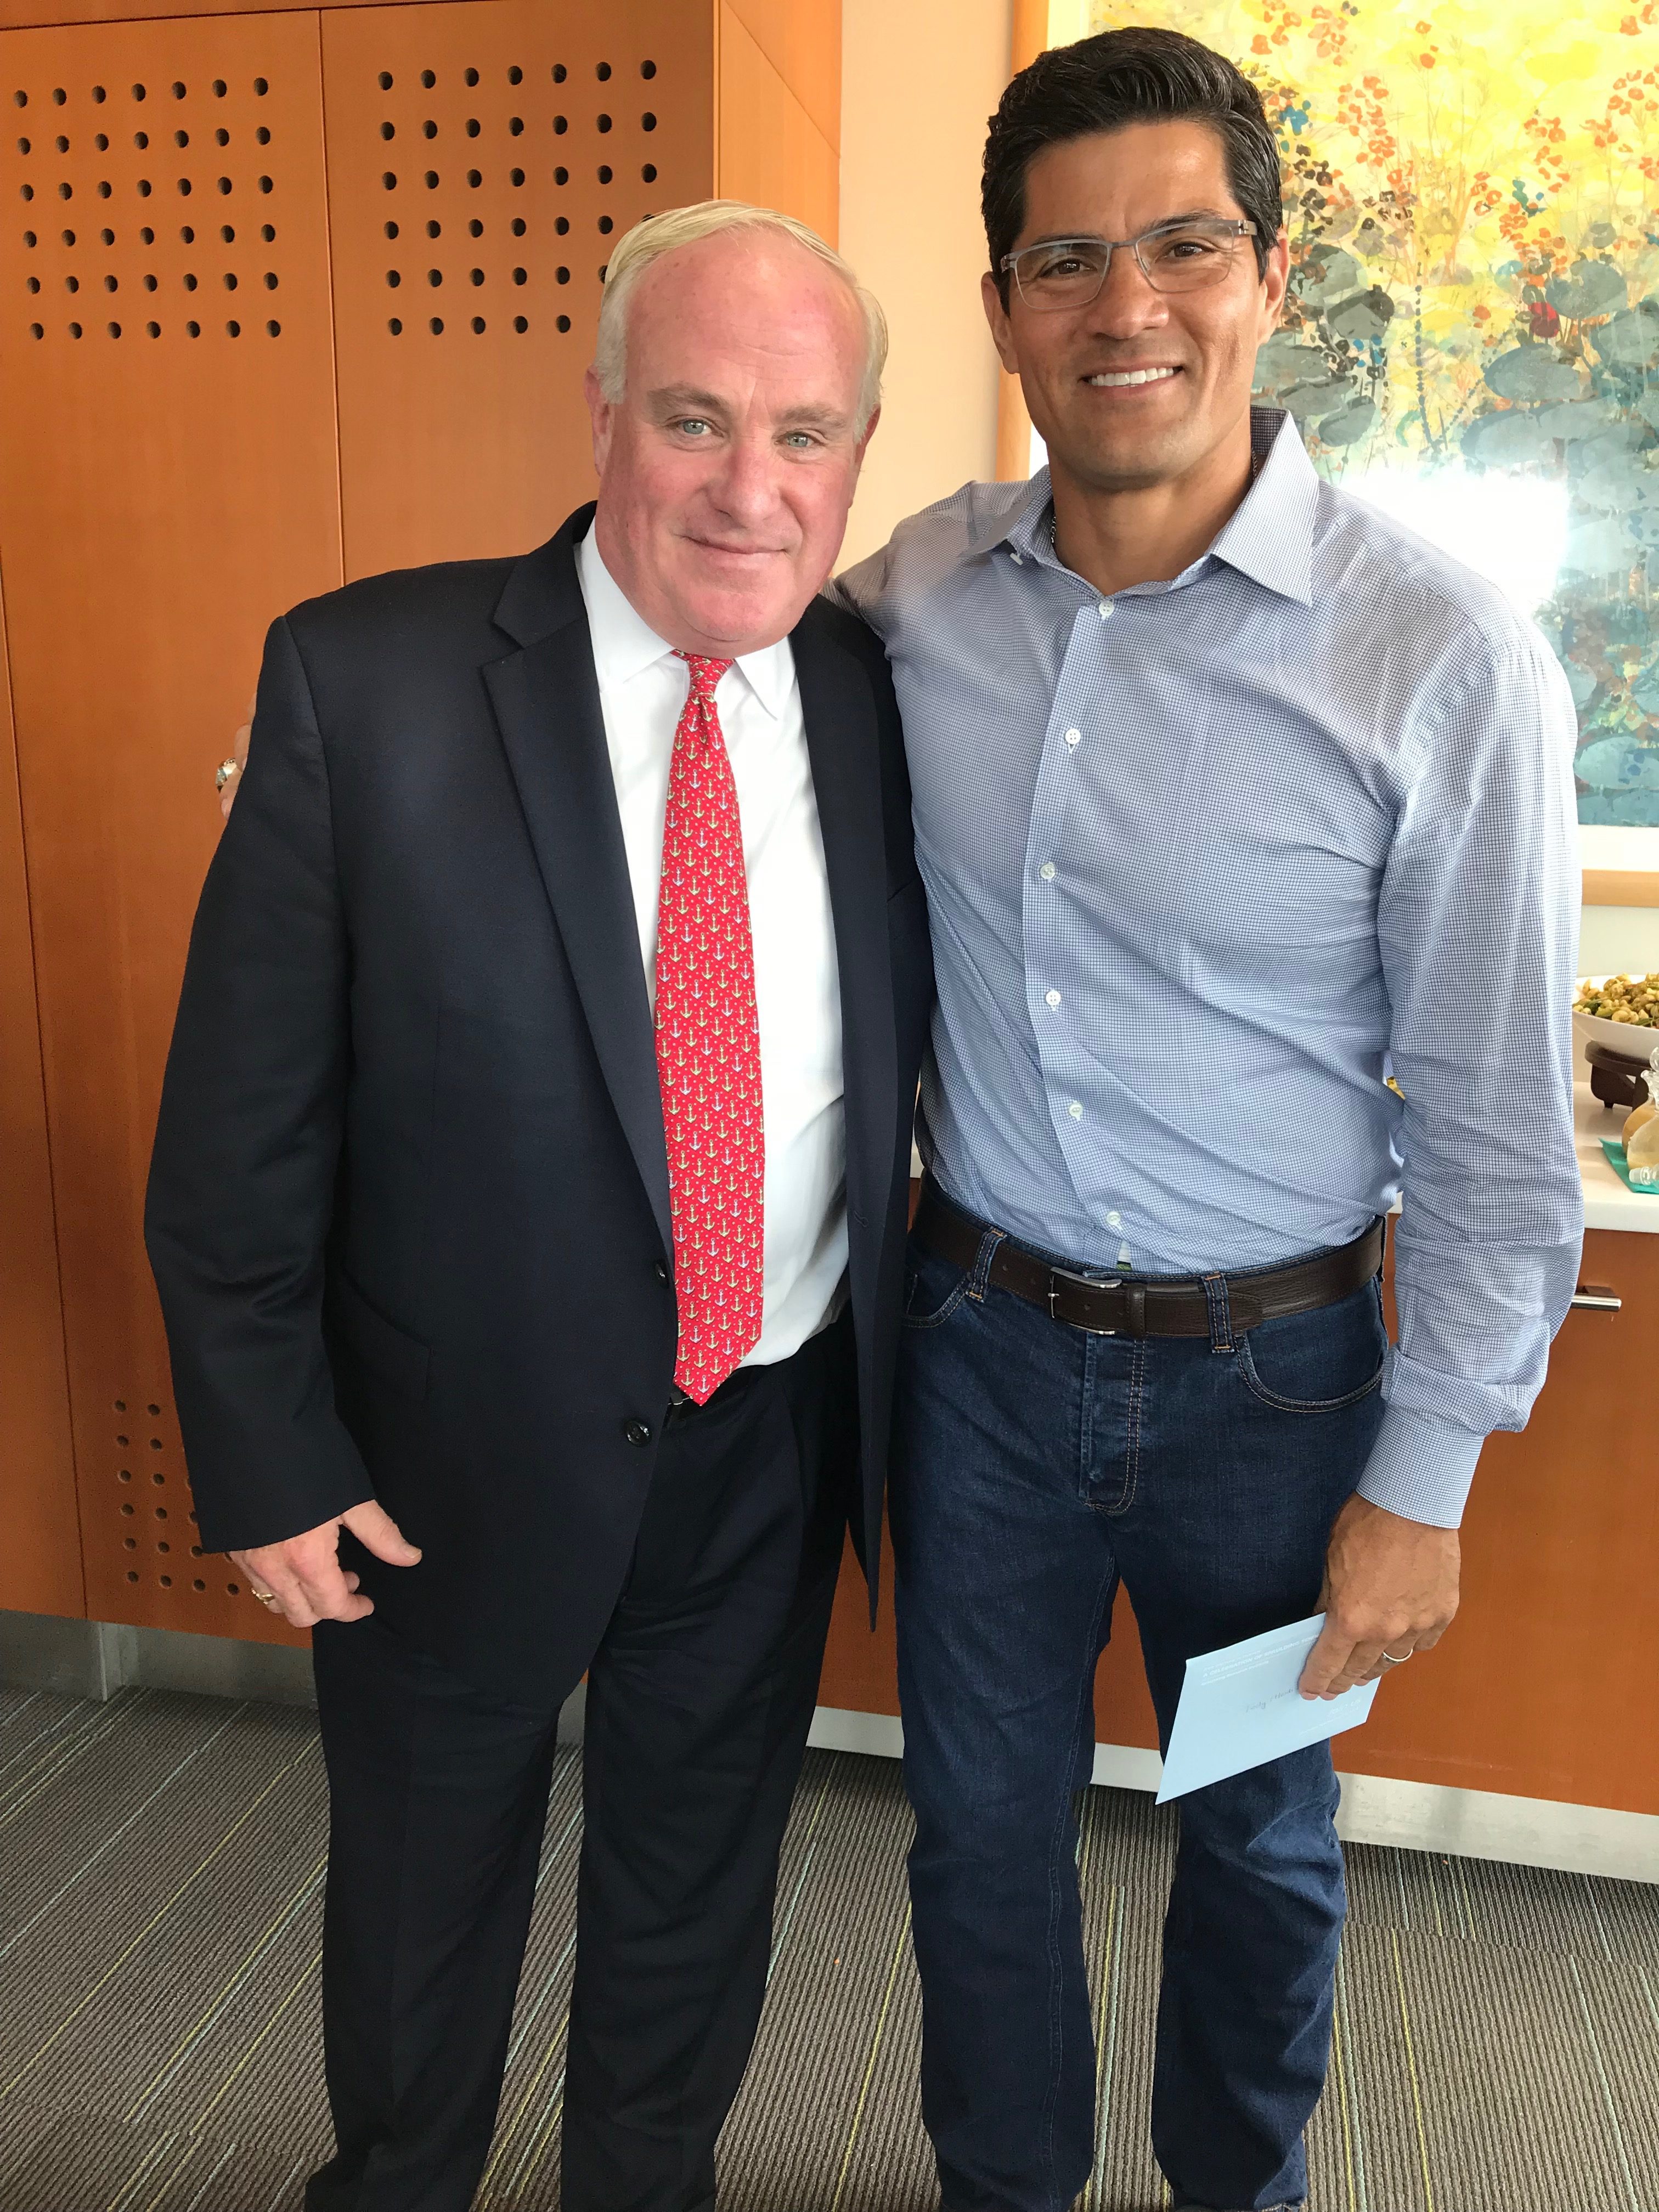 Tedy Bruschi & Richard Walsh pose for a photo